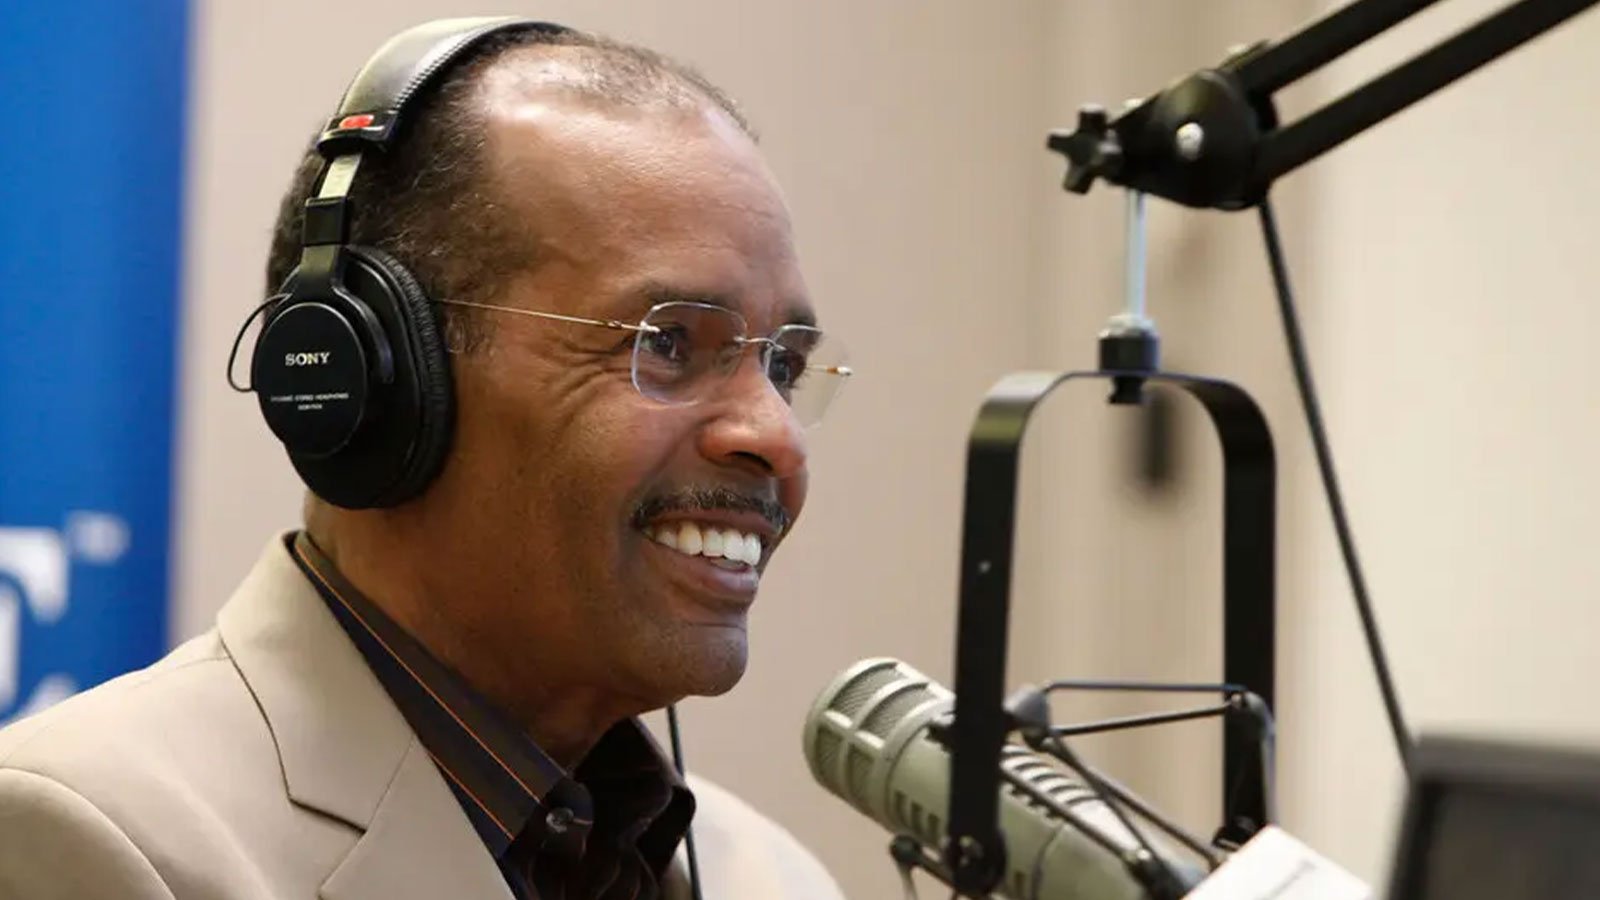 Mr. Madison in 2009 at SiriusXM, where his radio show aired Monday through Friday mornings on the Urban View channel. 